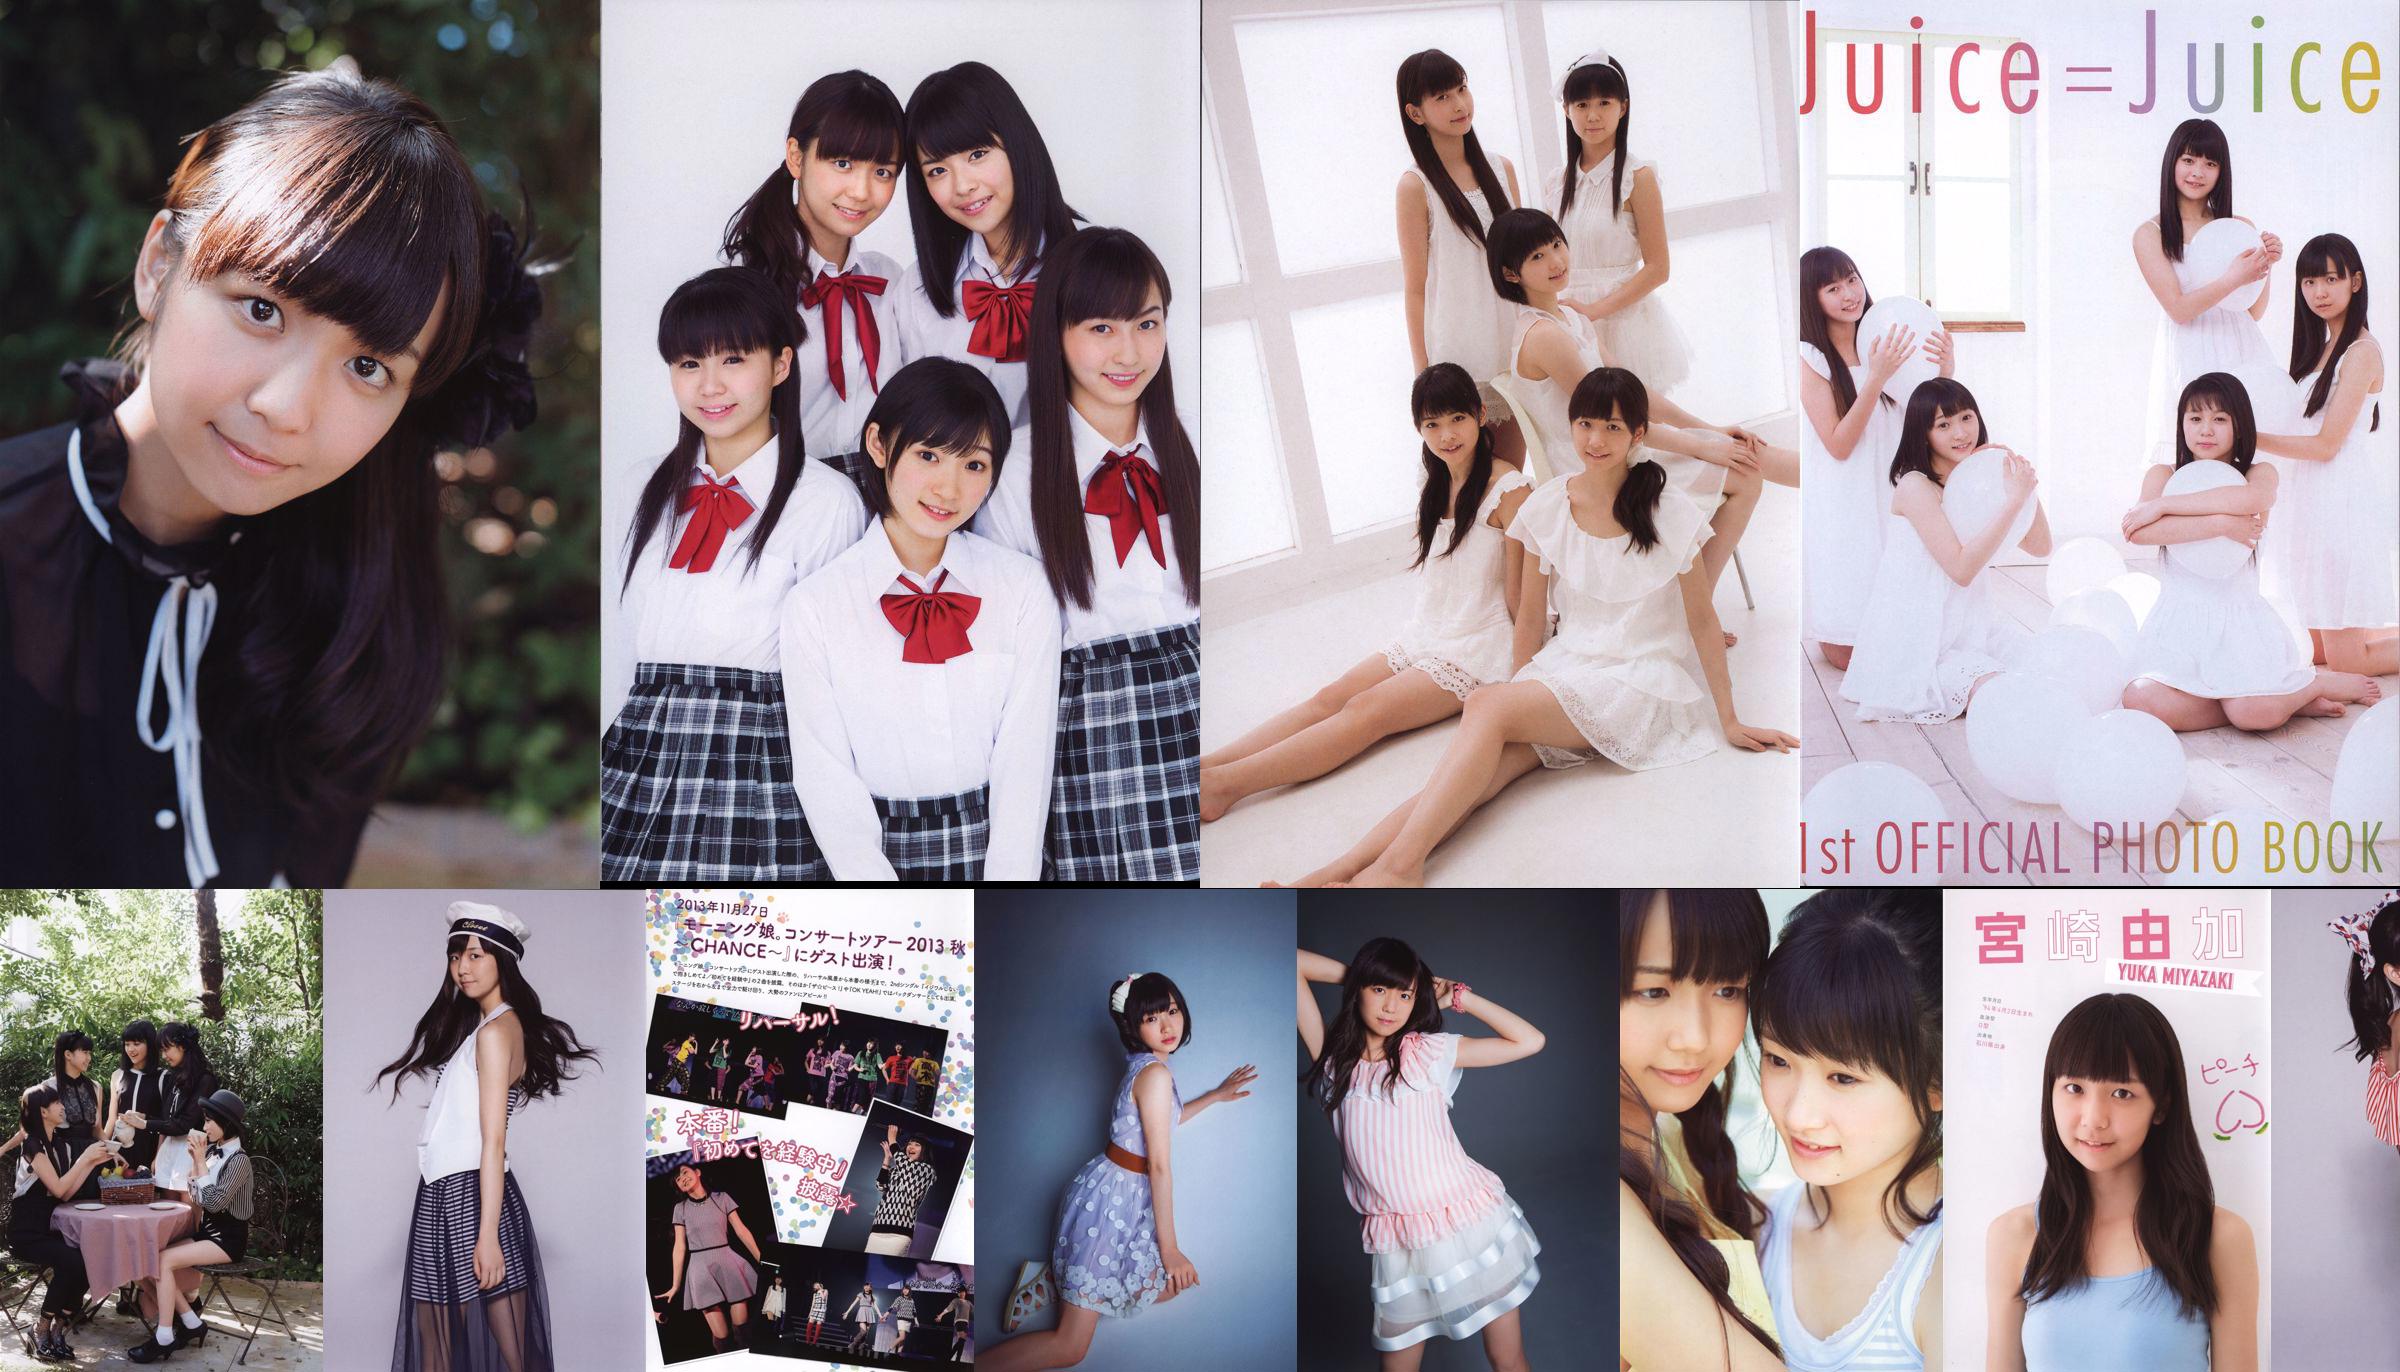 Japanese beautiful girl group Juice=Juice "OFFICIAL PHOTO BOOK" No.c44b44 Page 3